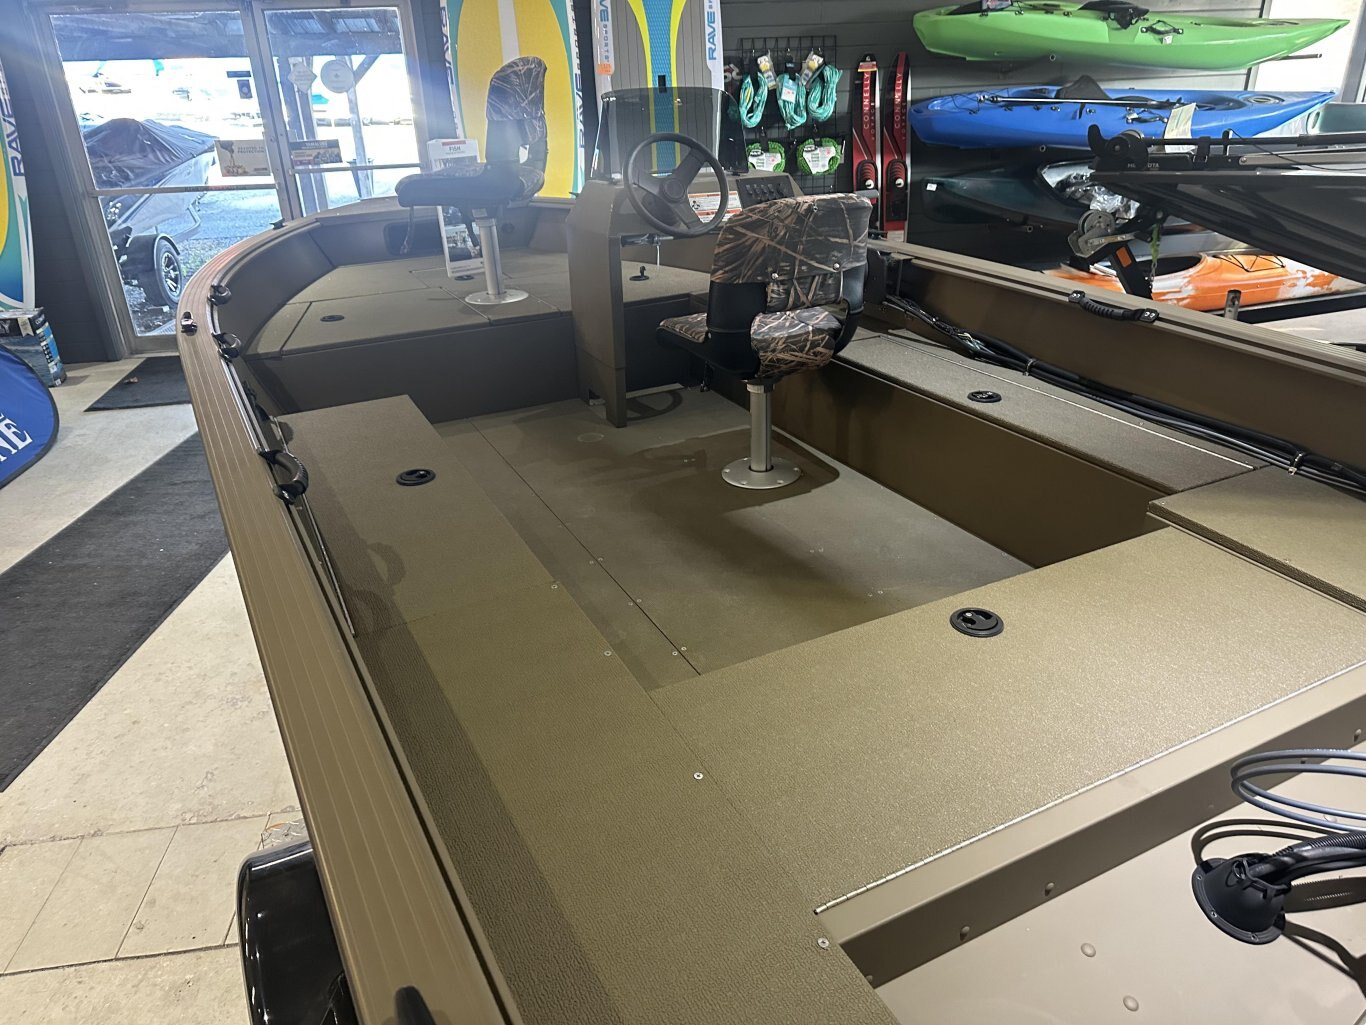 G3 Boats Outfitter V167 T